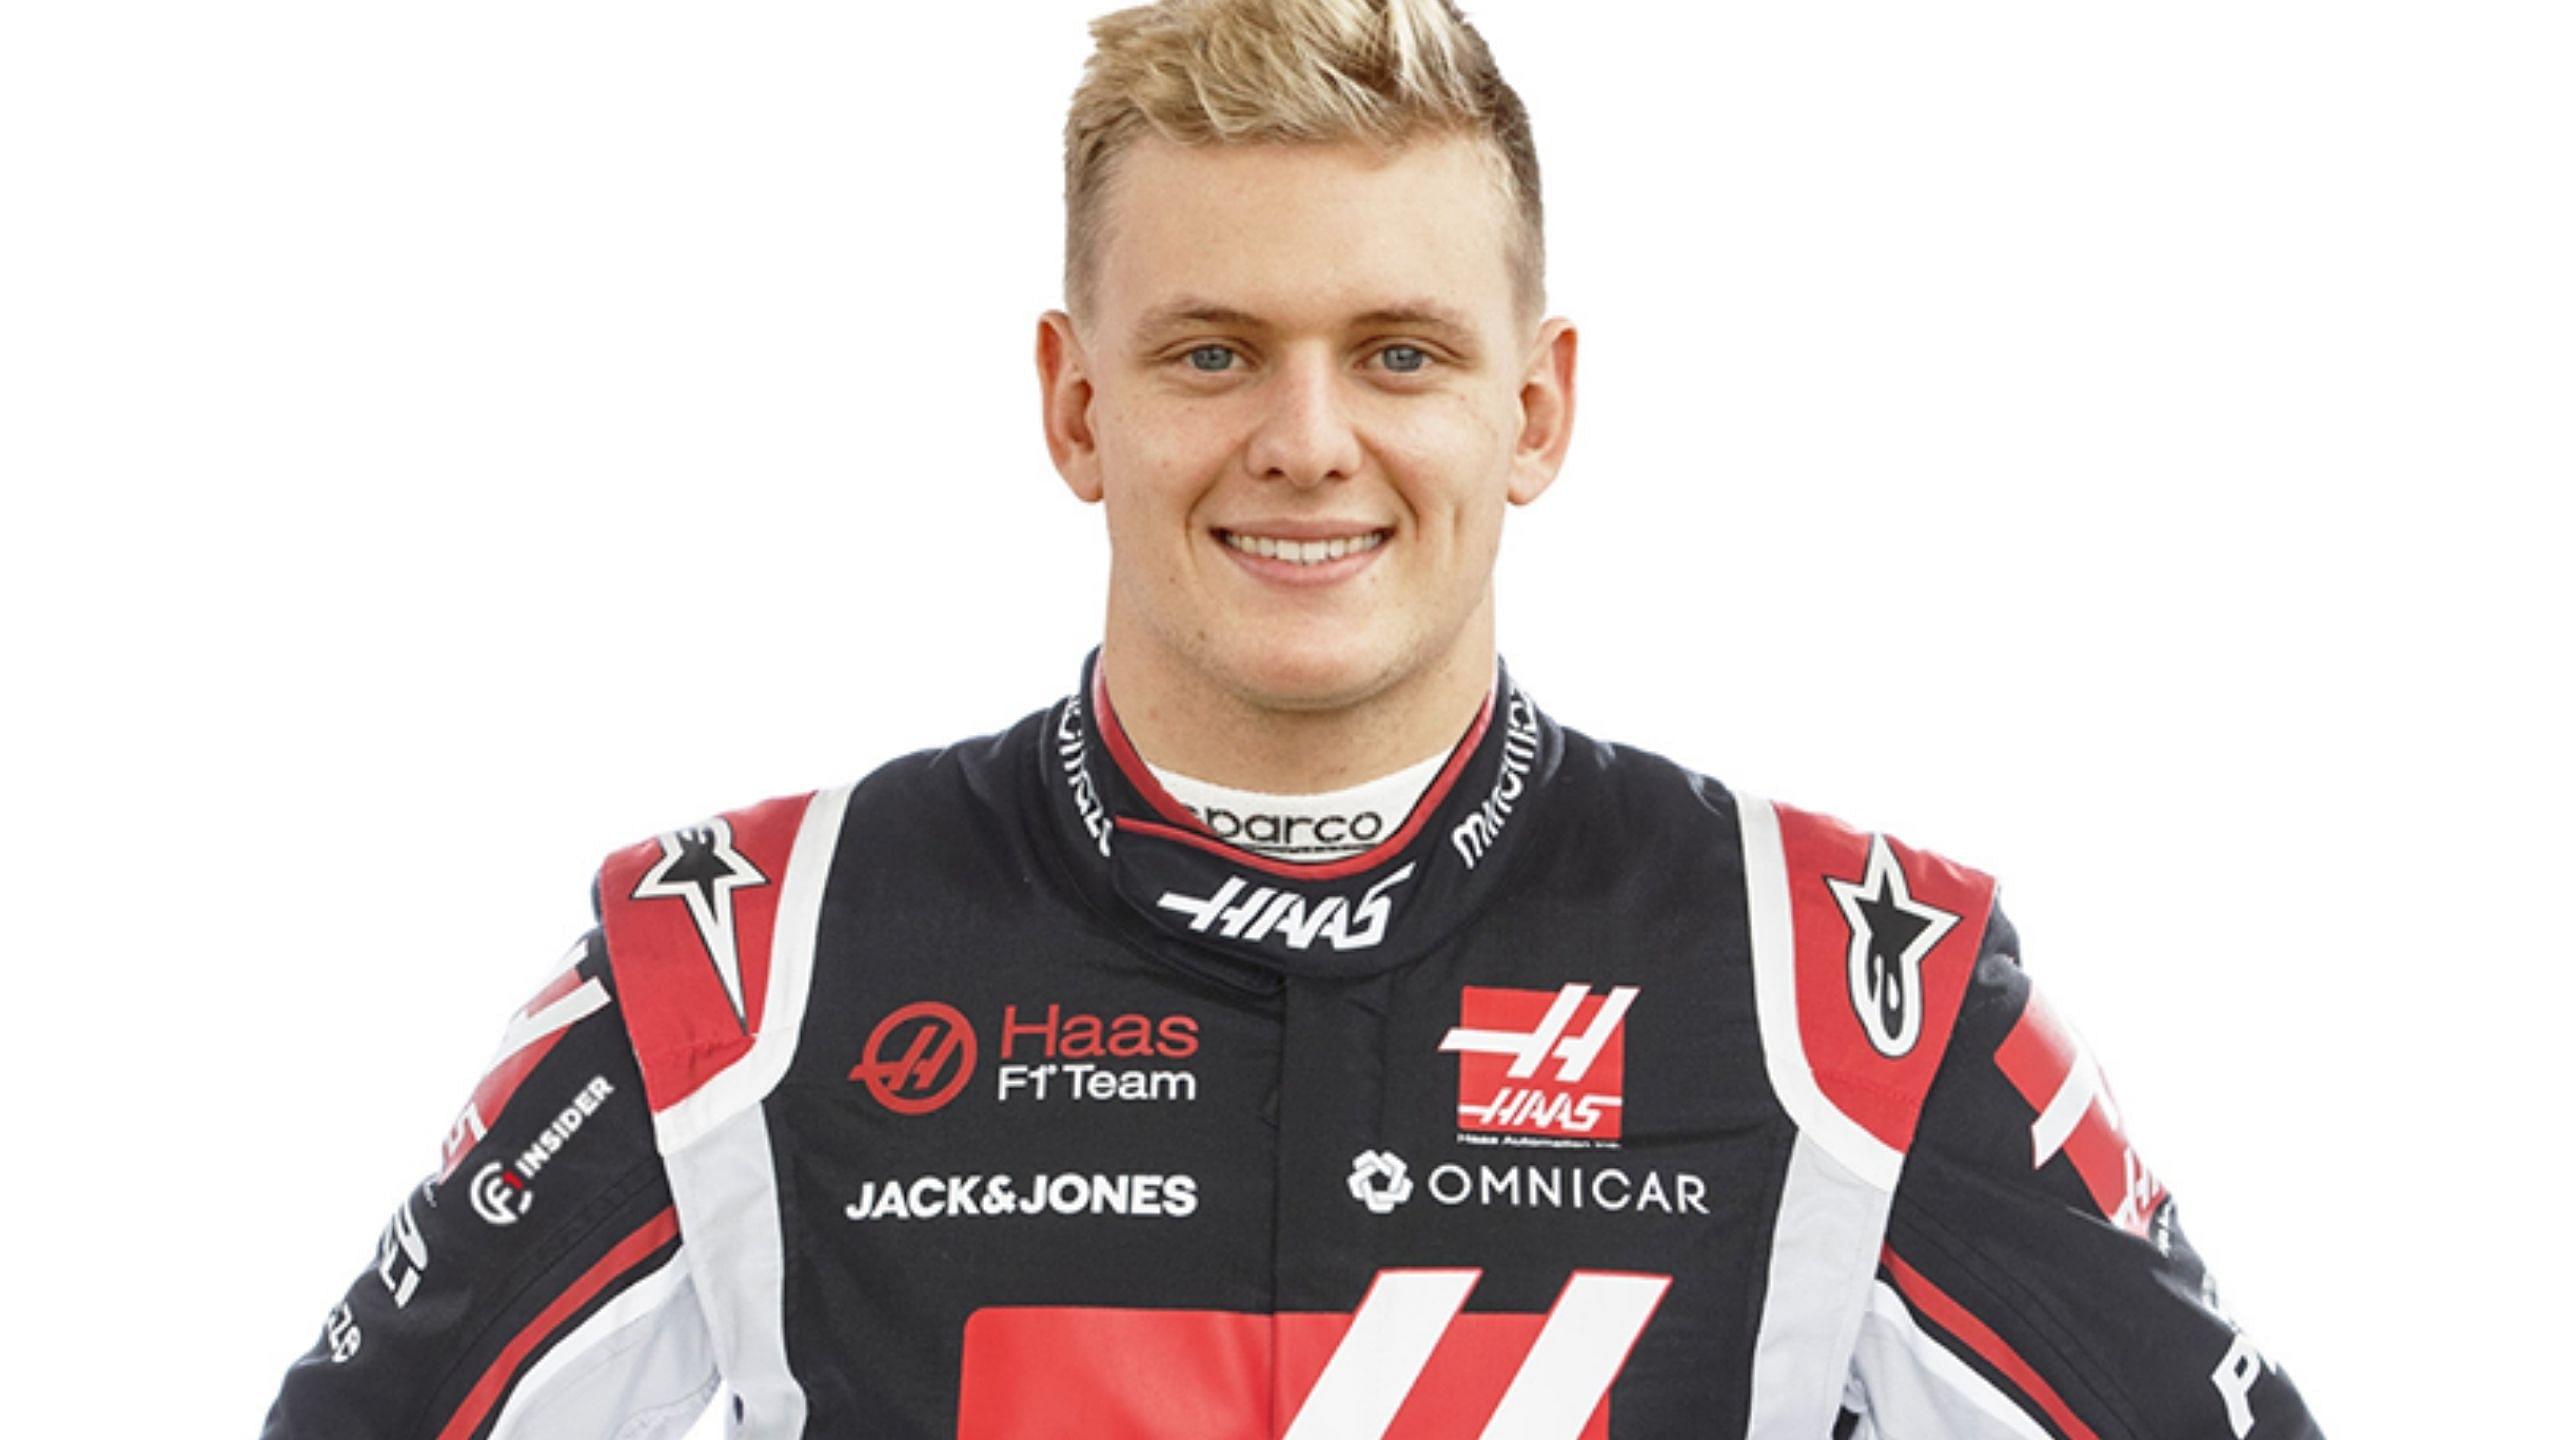 Done Deal: Haas to confirm Mick Schumacher as their driver for 2021 season in the coming days